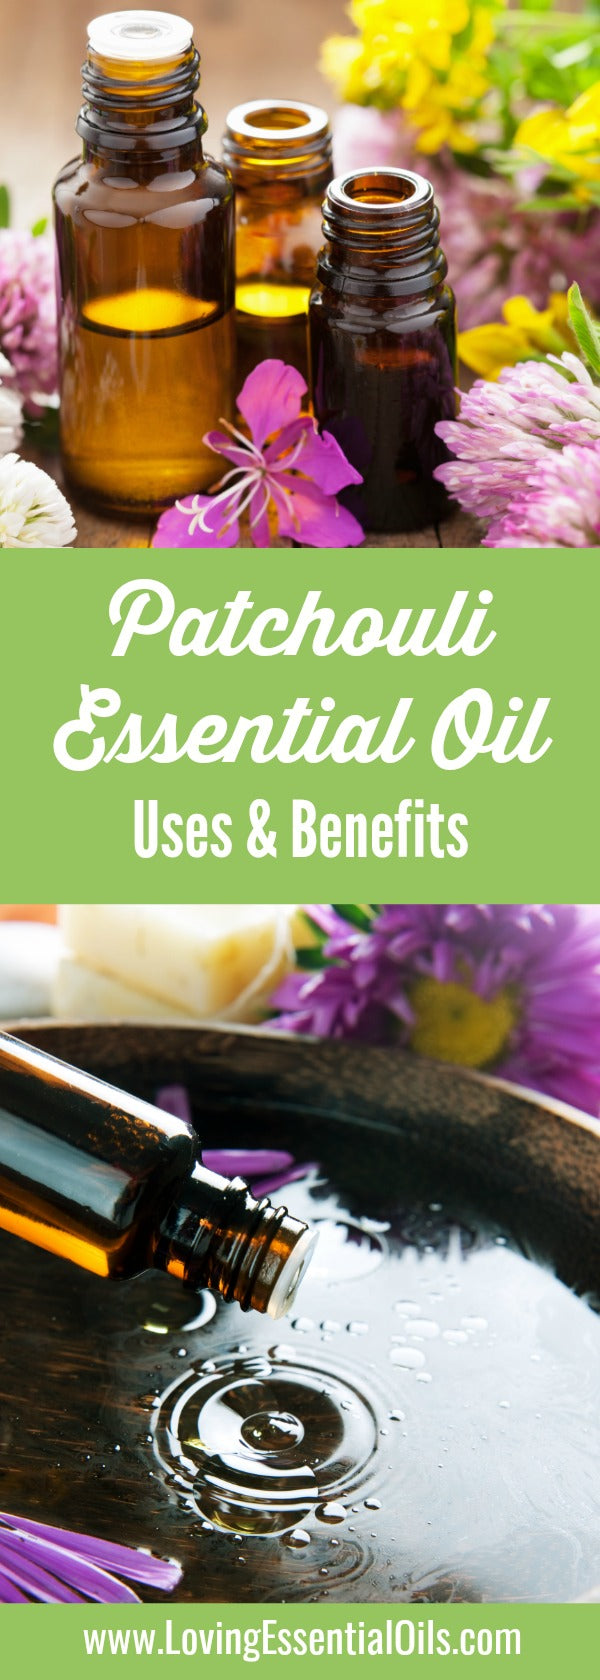 Patchouli Essential Oil: Benefits & Uses